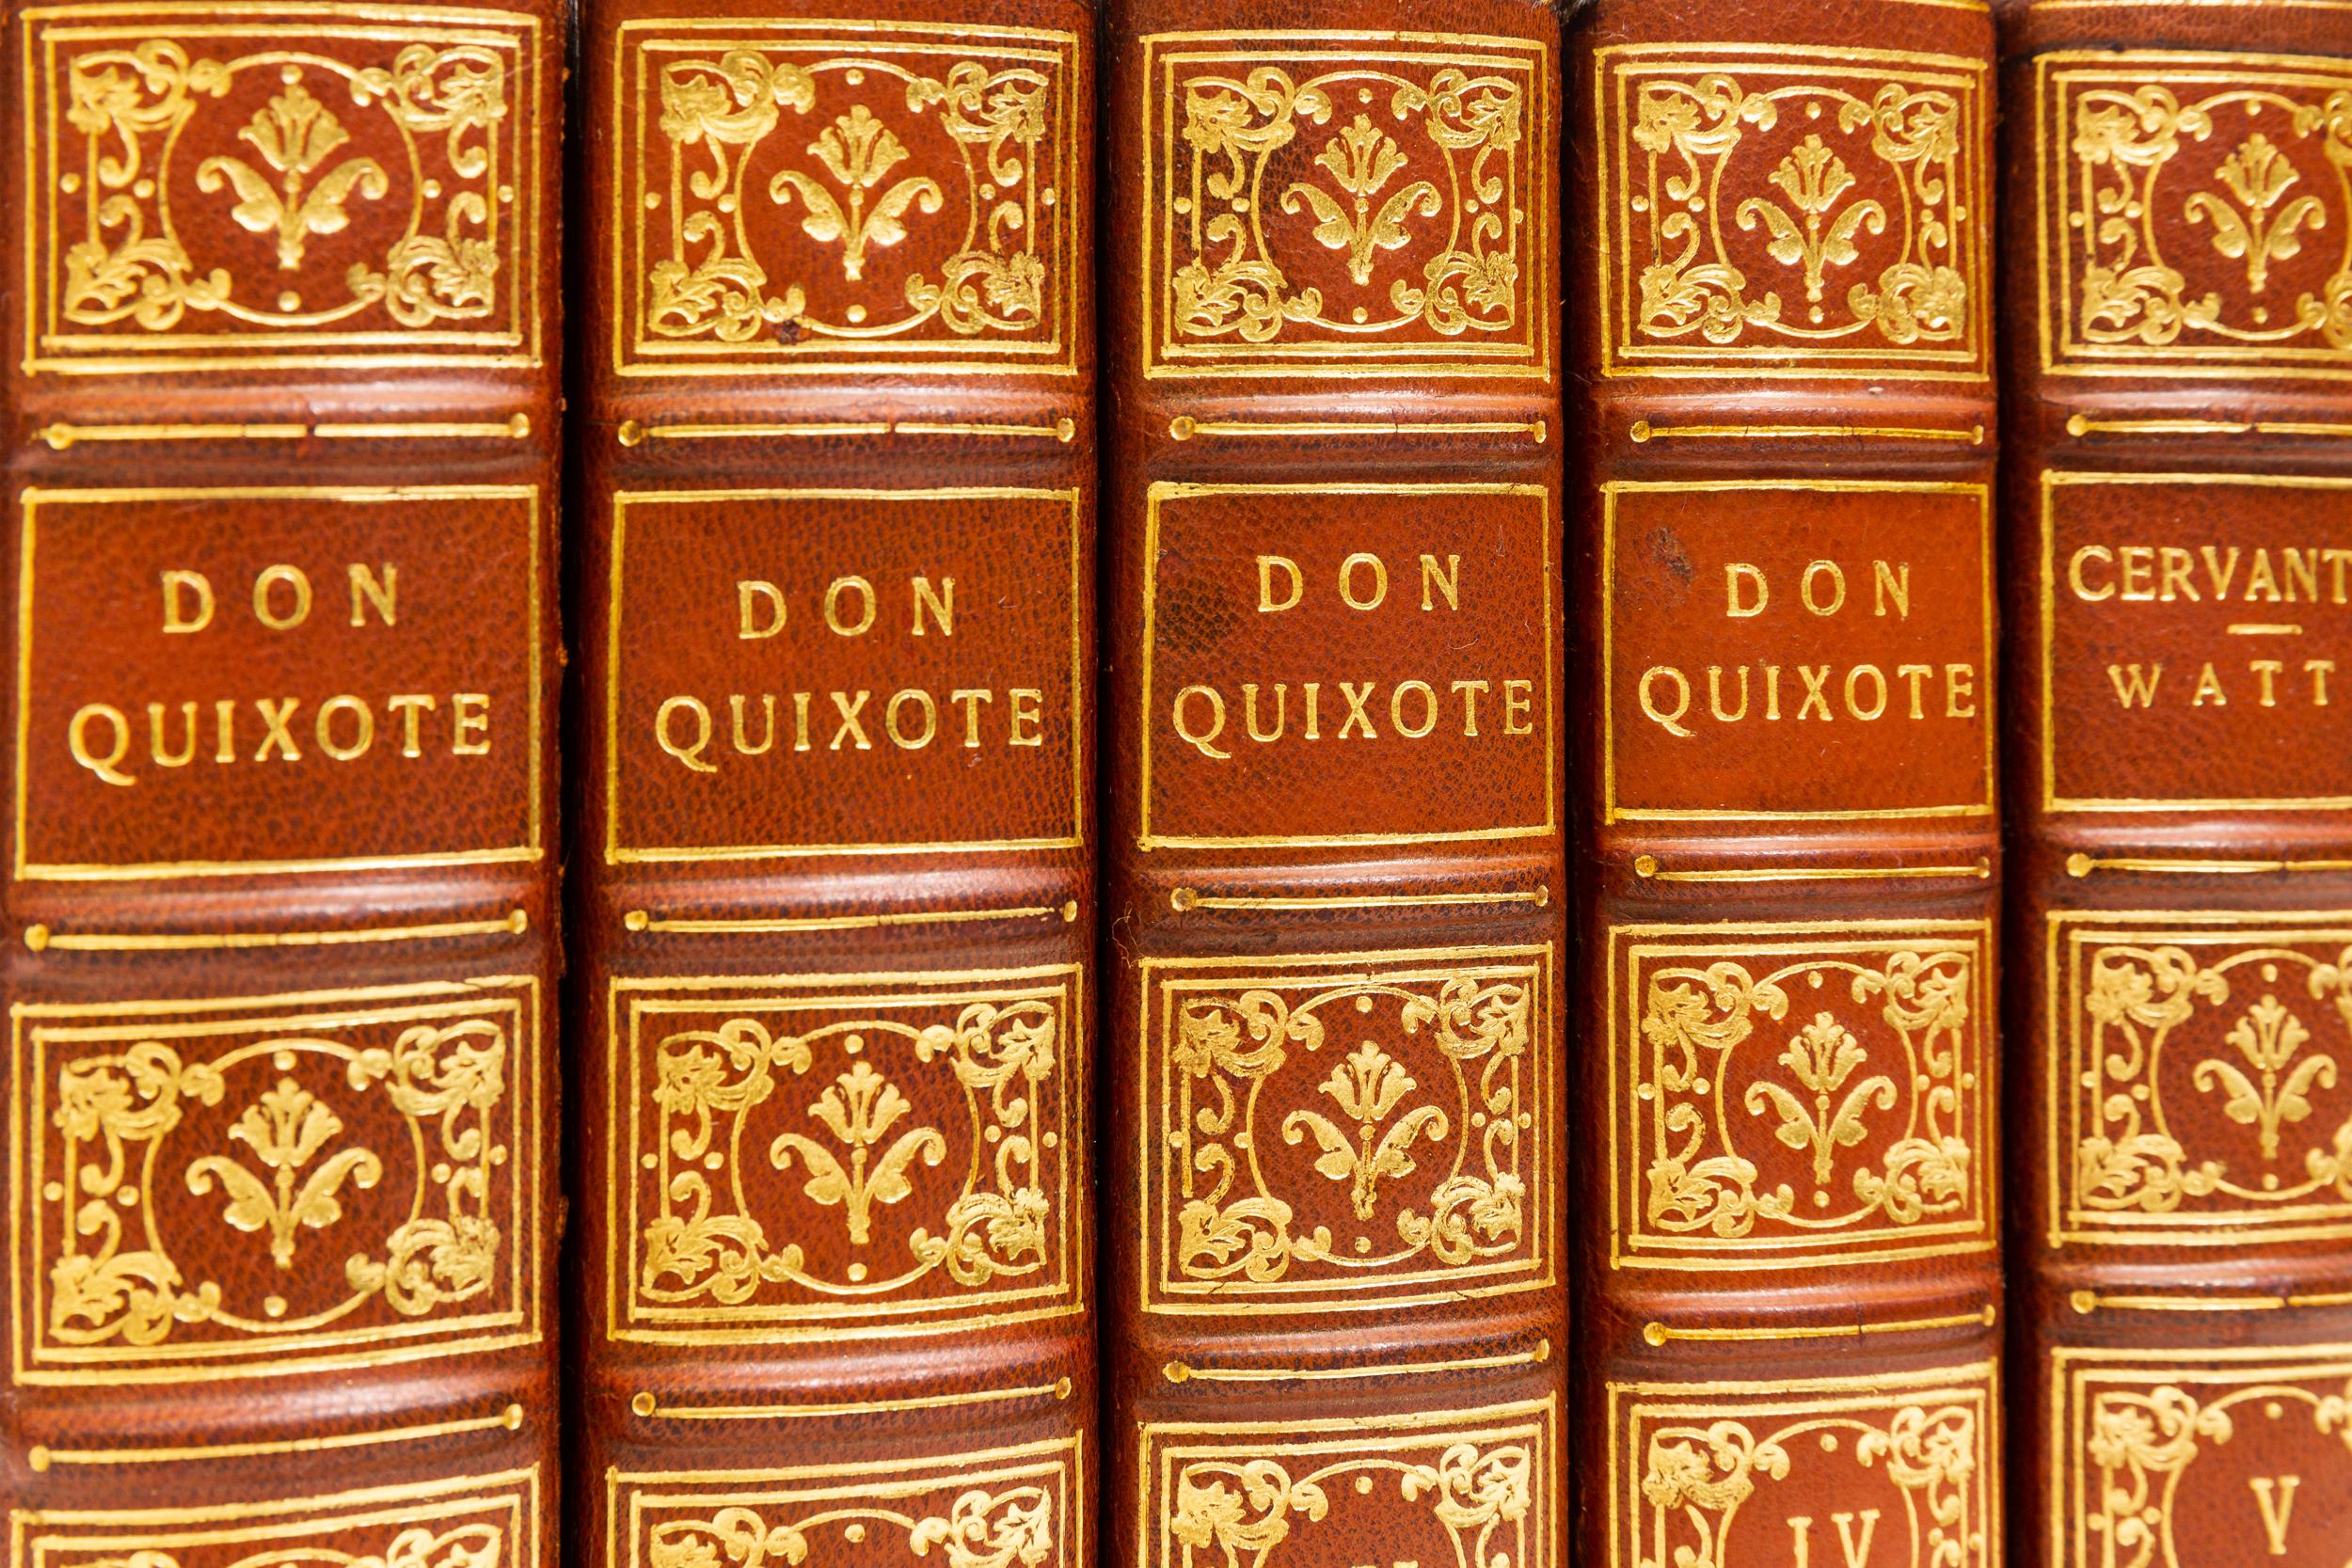 5 Volumes. Cervantes & Watts. Don Quixote and The Life of Cervantes.
Bound in 3/4 tan morocco, linen boards, top edges gilt, raised bands, ornate gilt on spines. Published: London: Adam & Charles Black 1895.